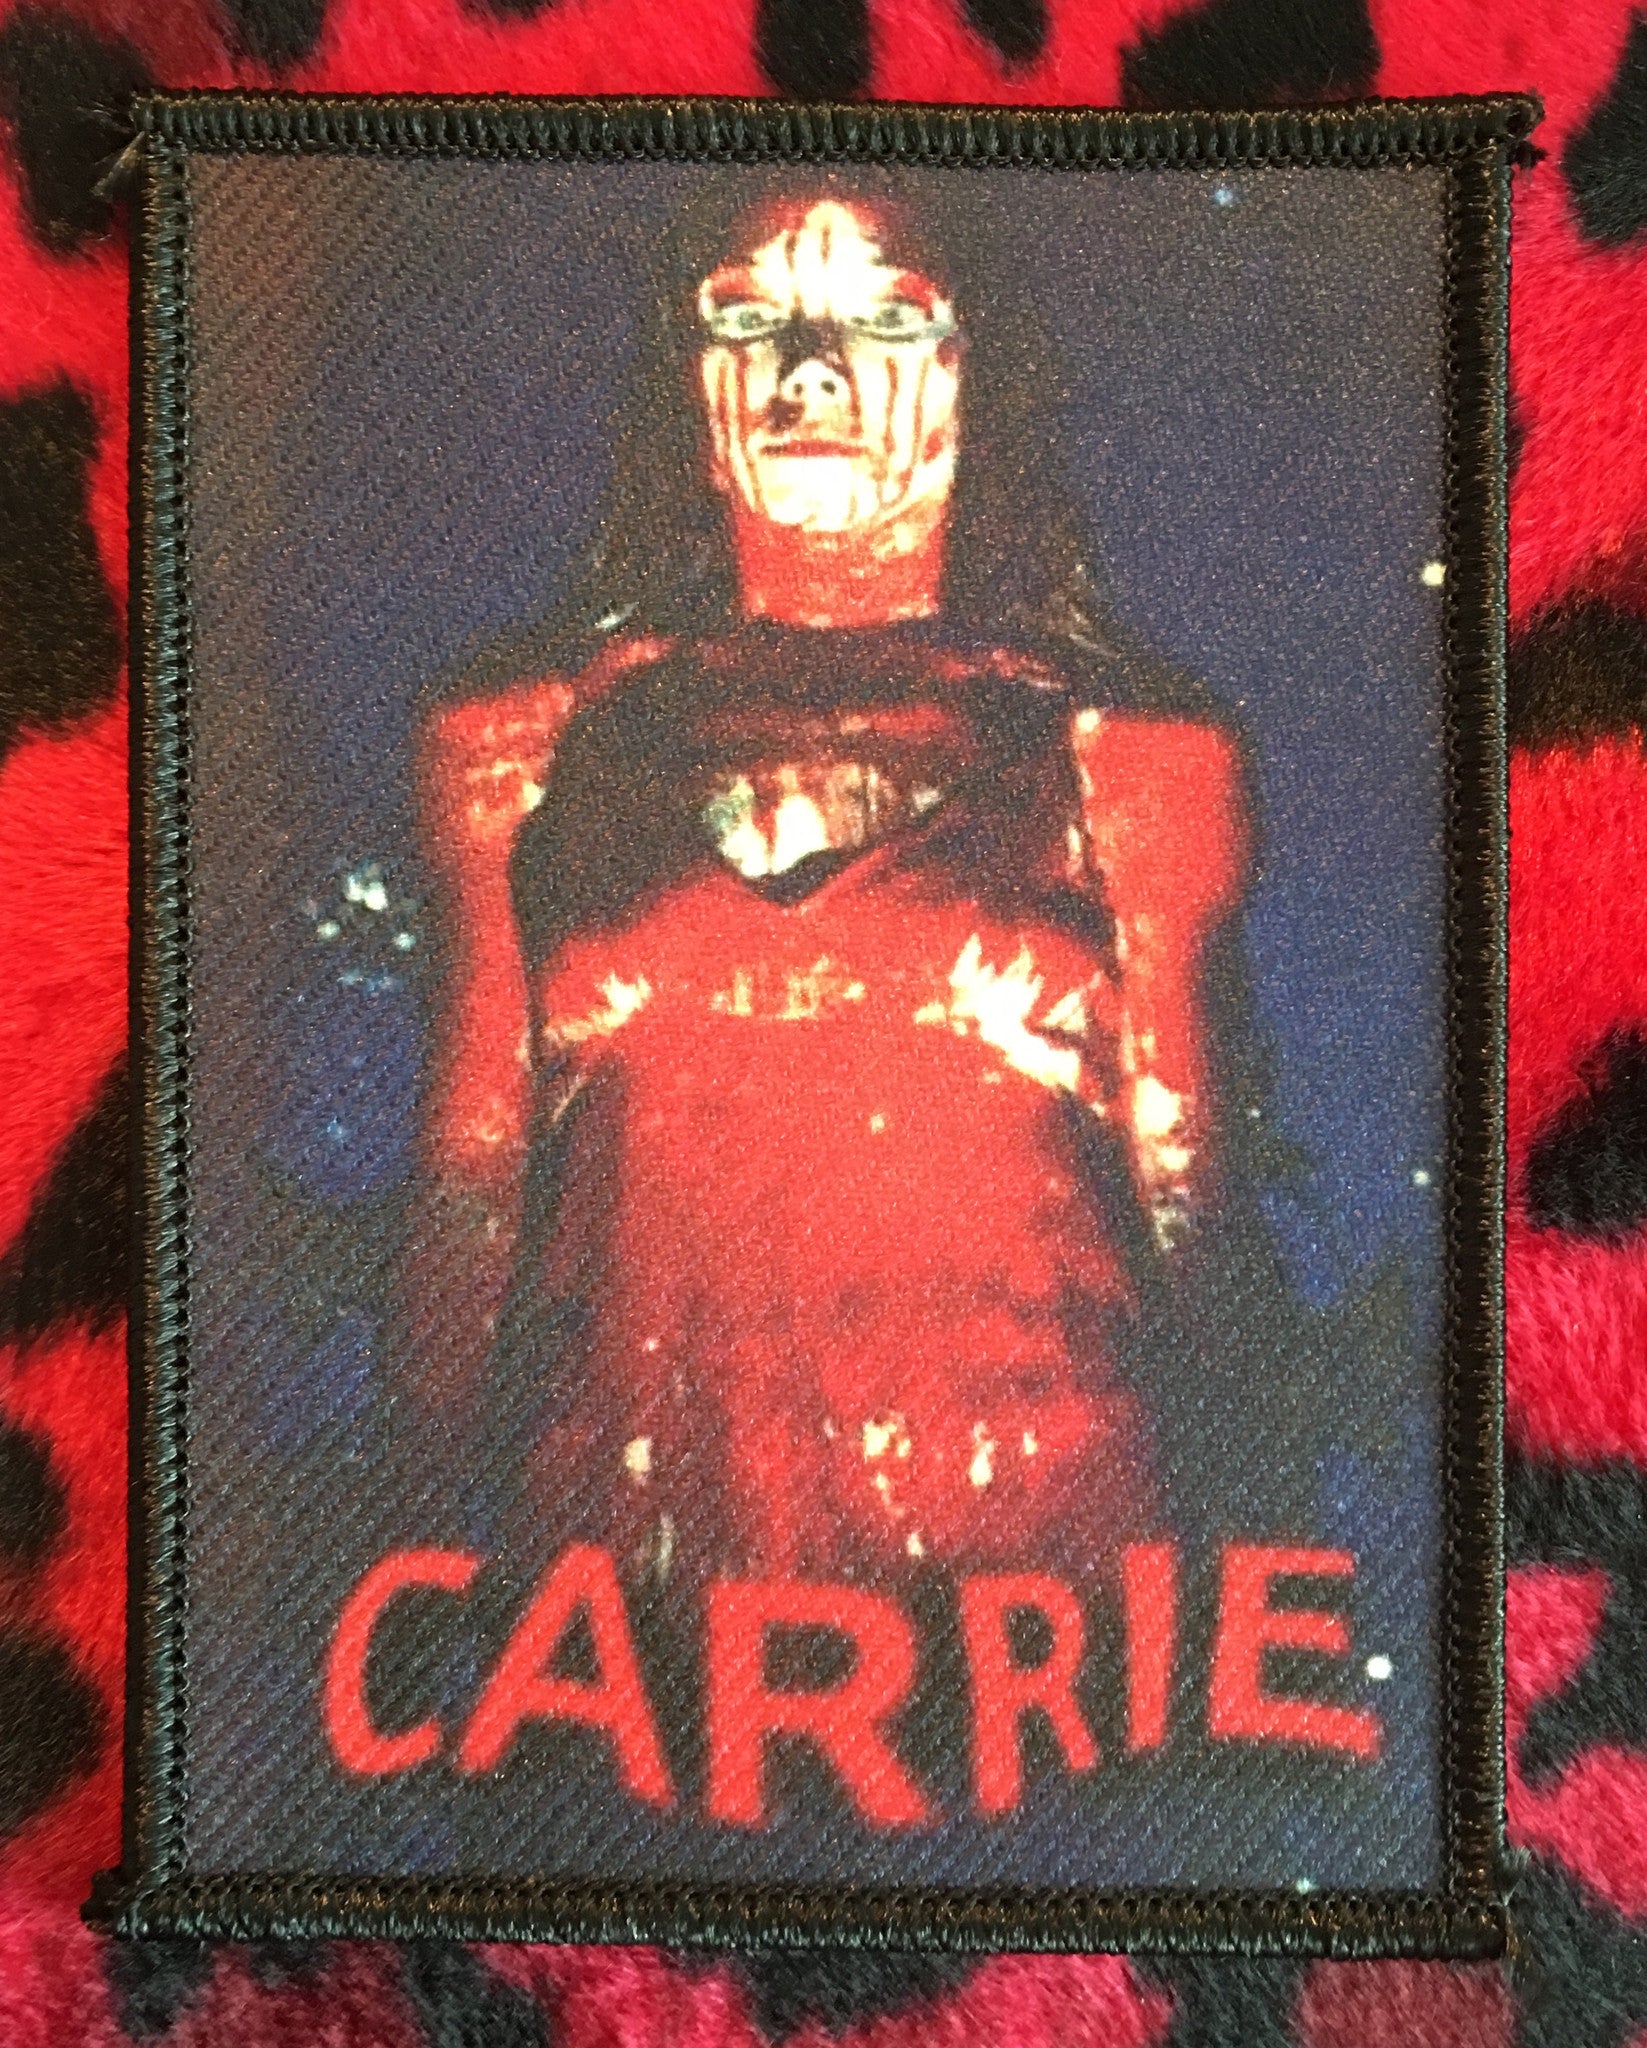 Carrie Patch